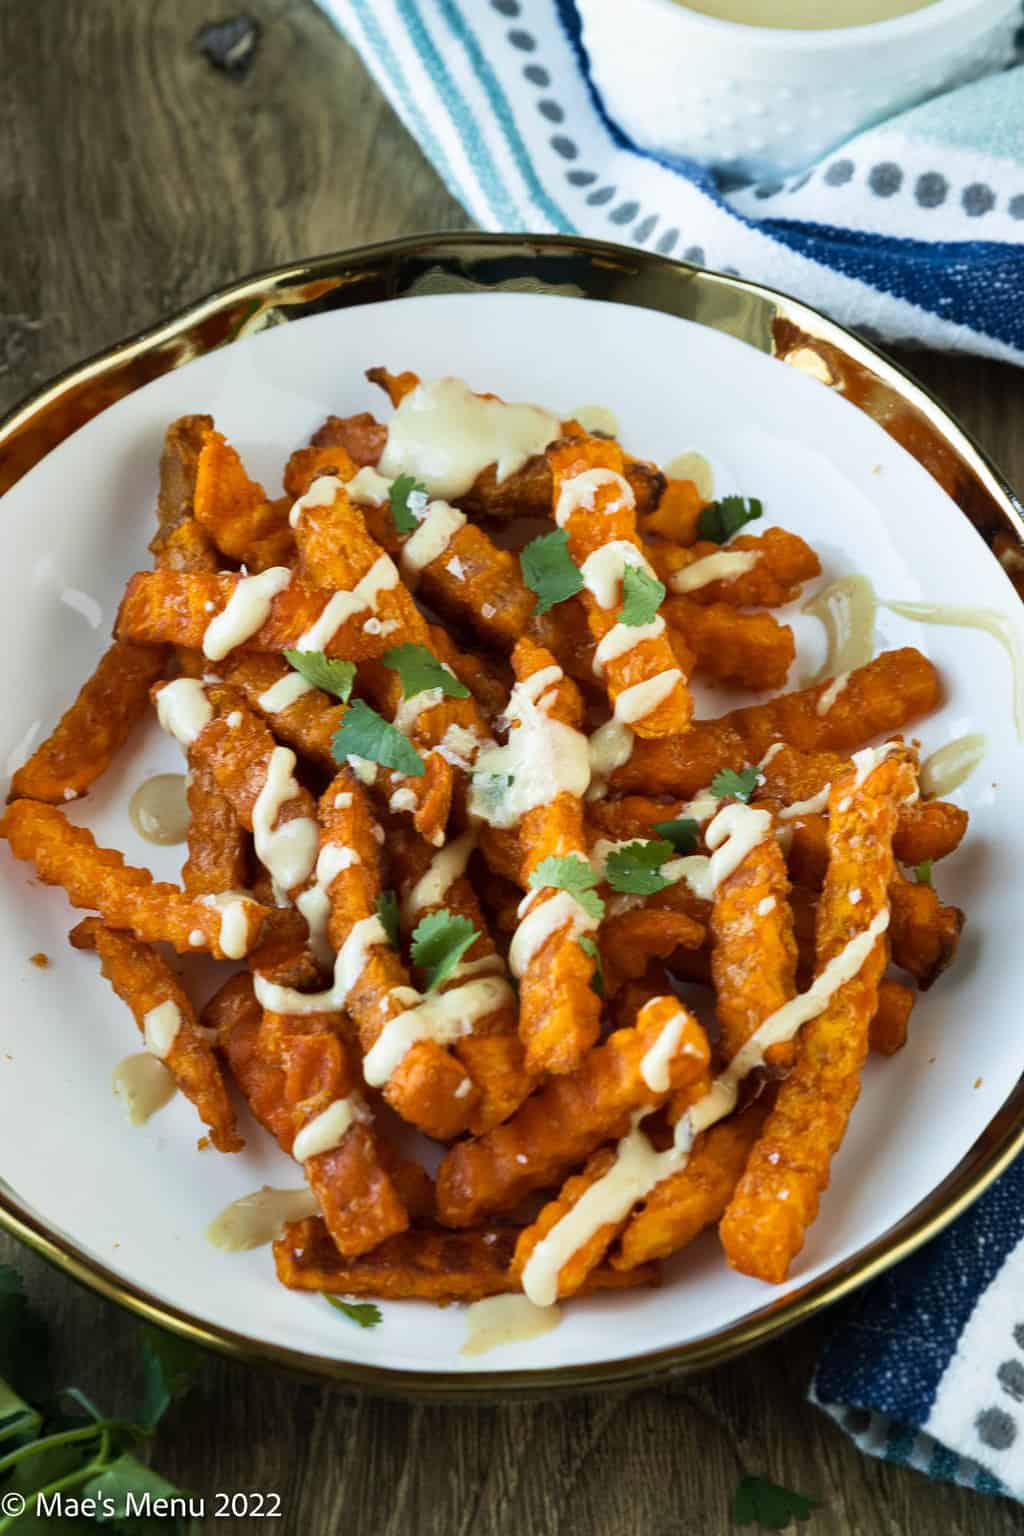 A decorative plate of air fryer sweet potato fries drizzled with honey mustard sauce.